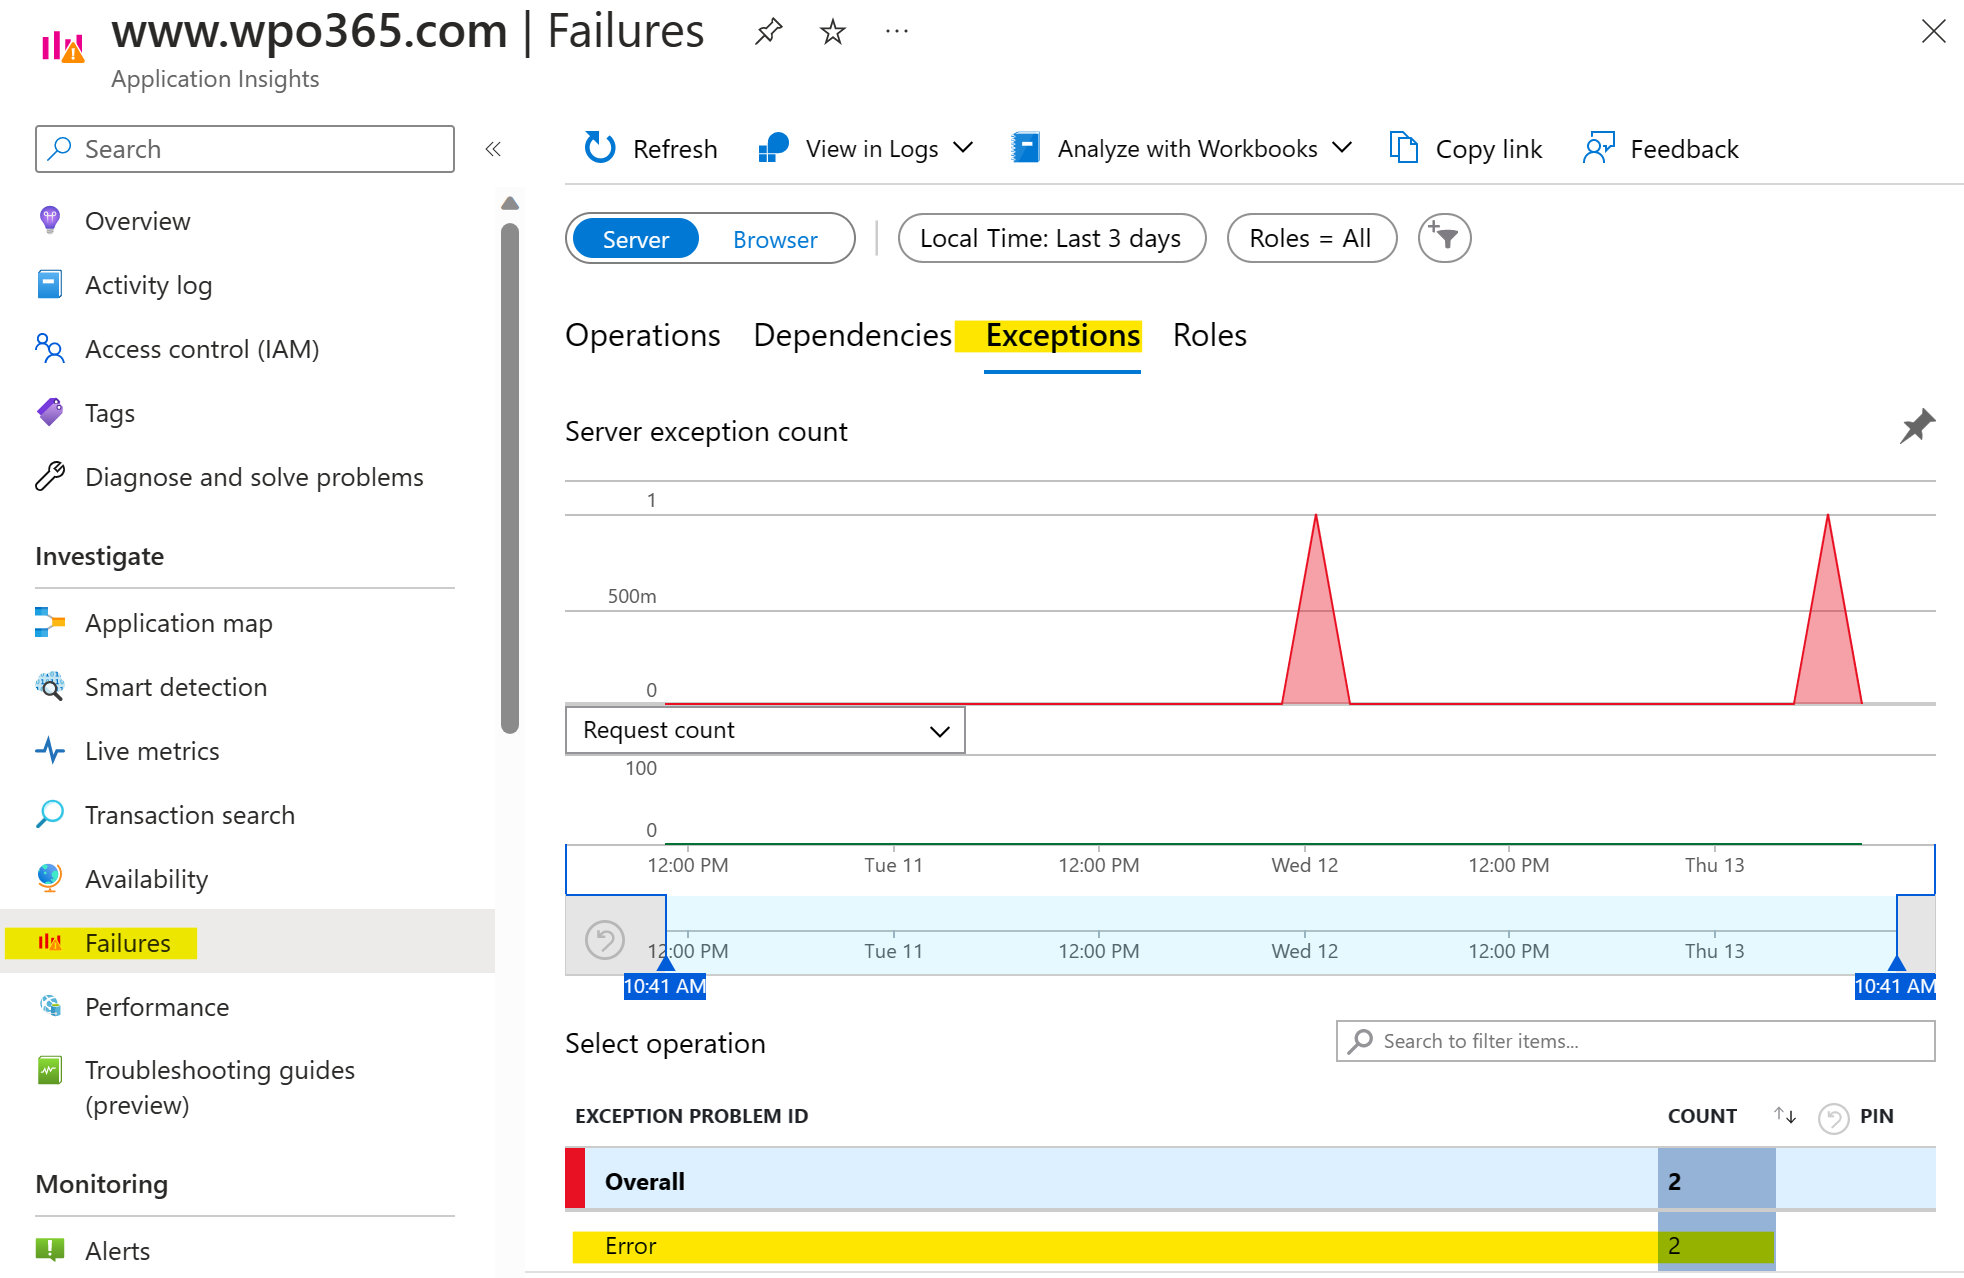 Investigate Failures logged by the WPO365 | LOGIN plugin in Application Insights.